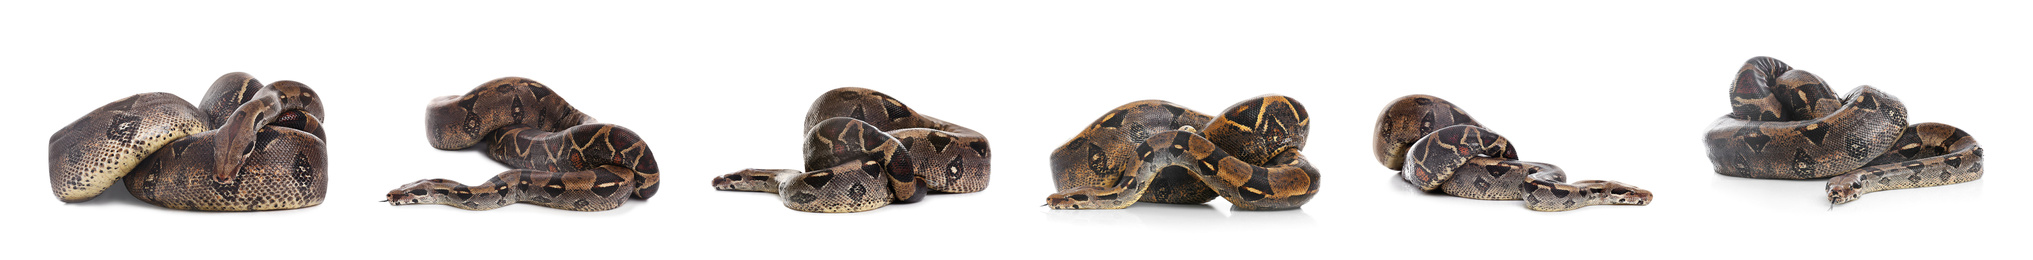 Image of Photos of boa constrictor on white background, collage. Banner design